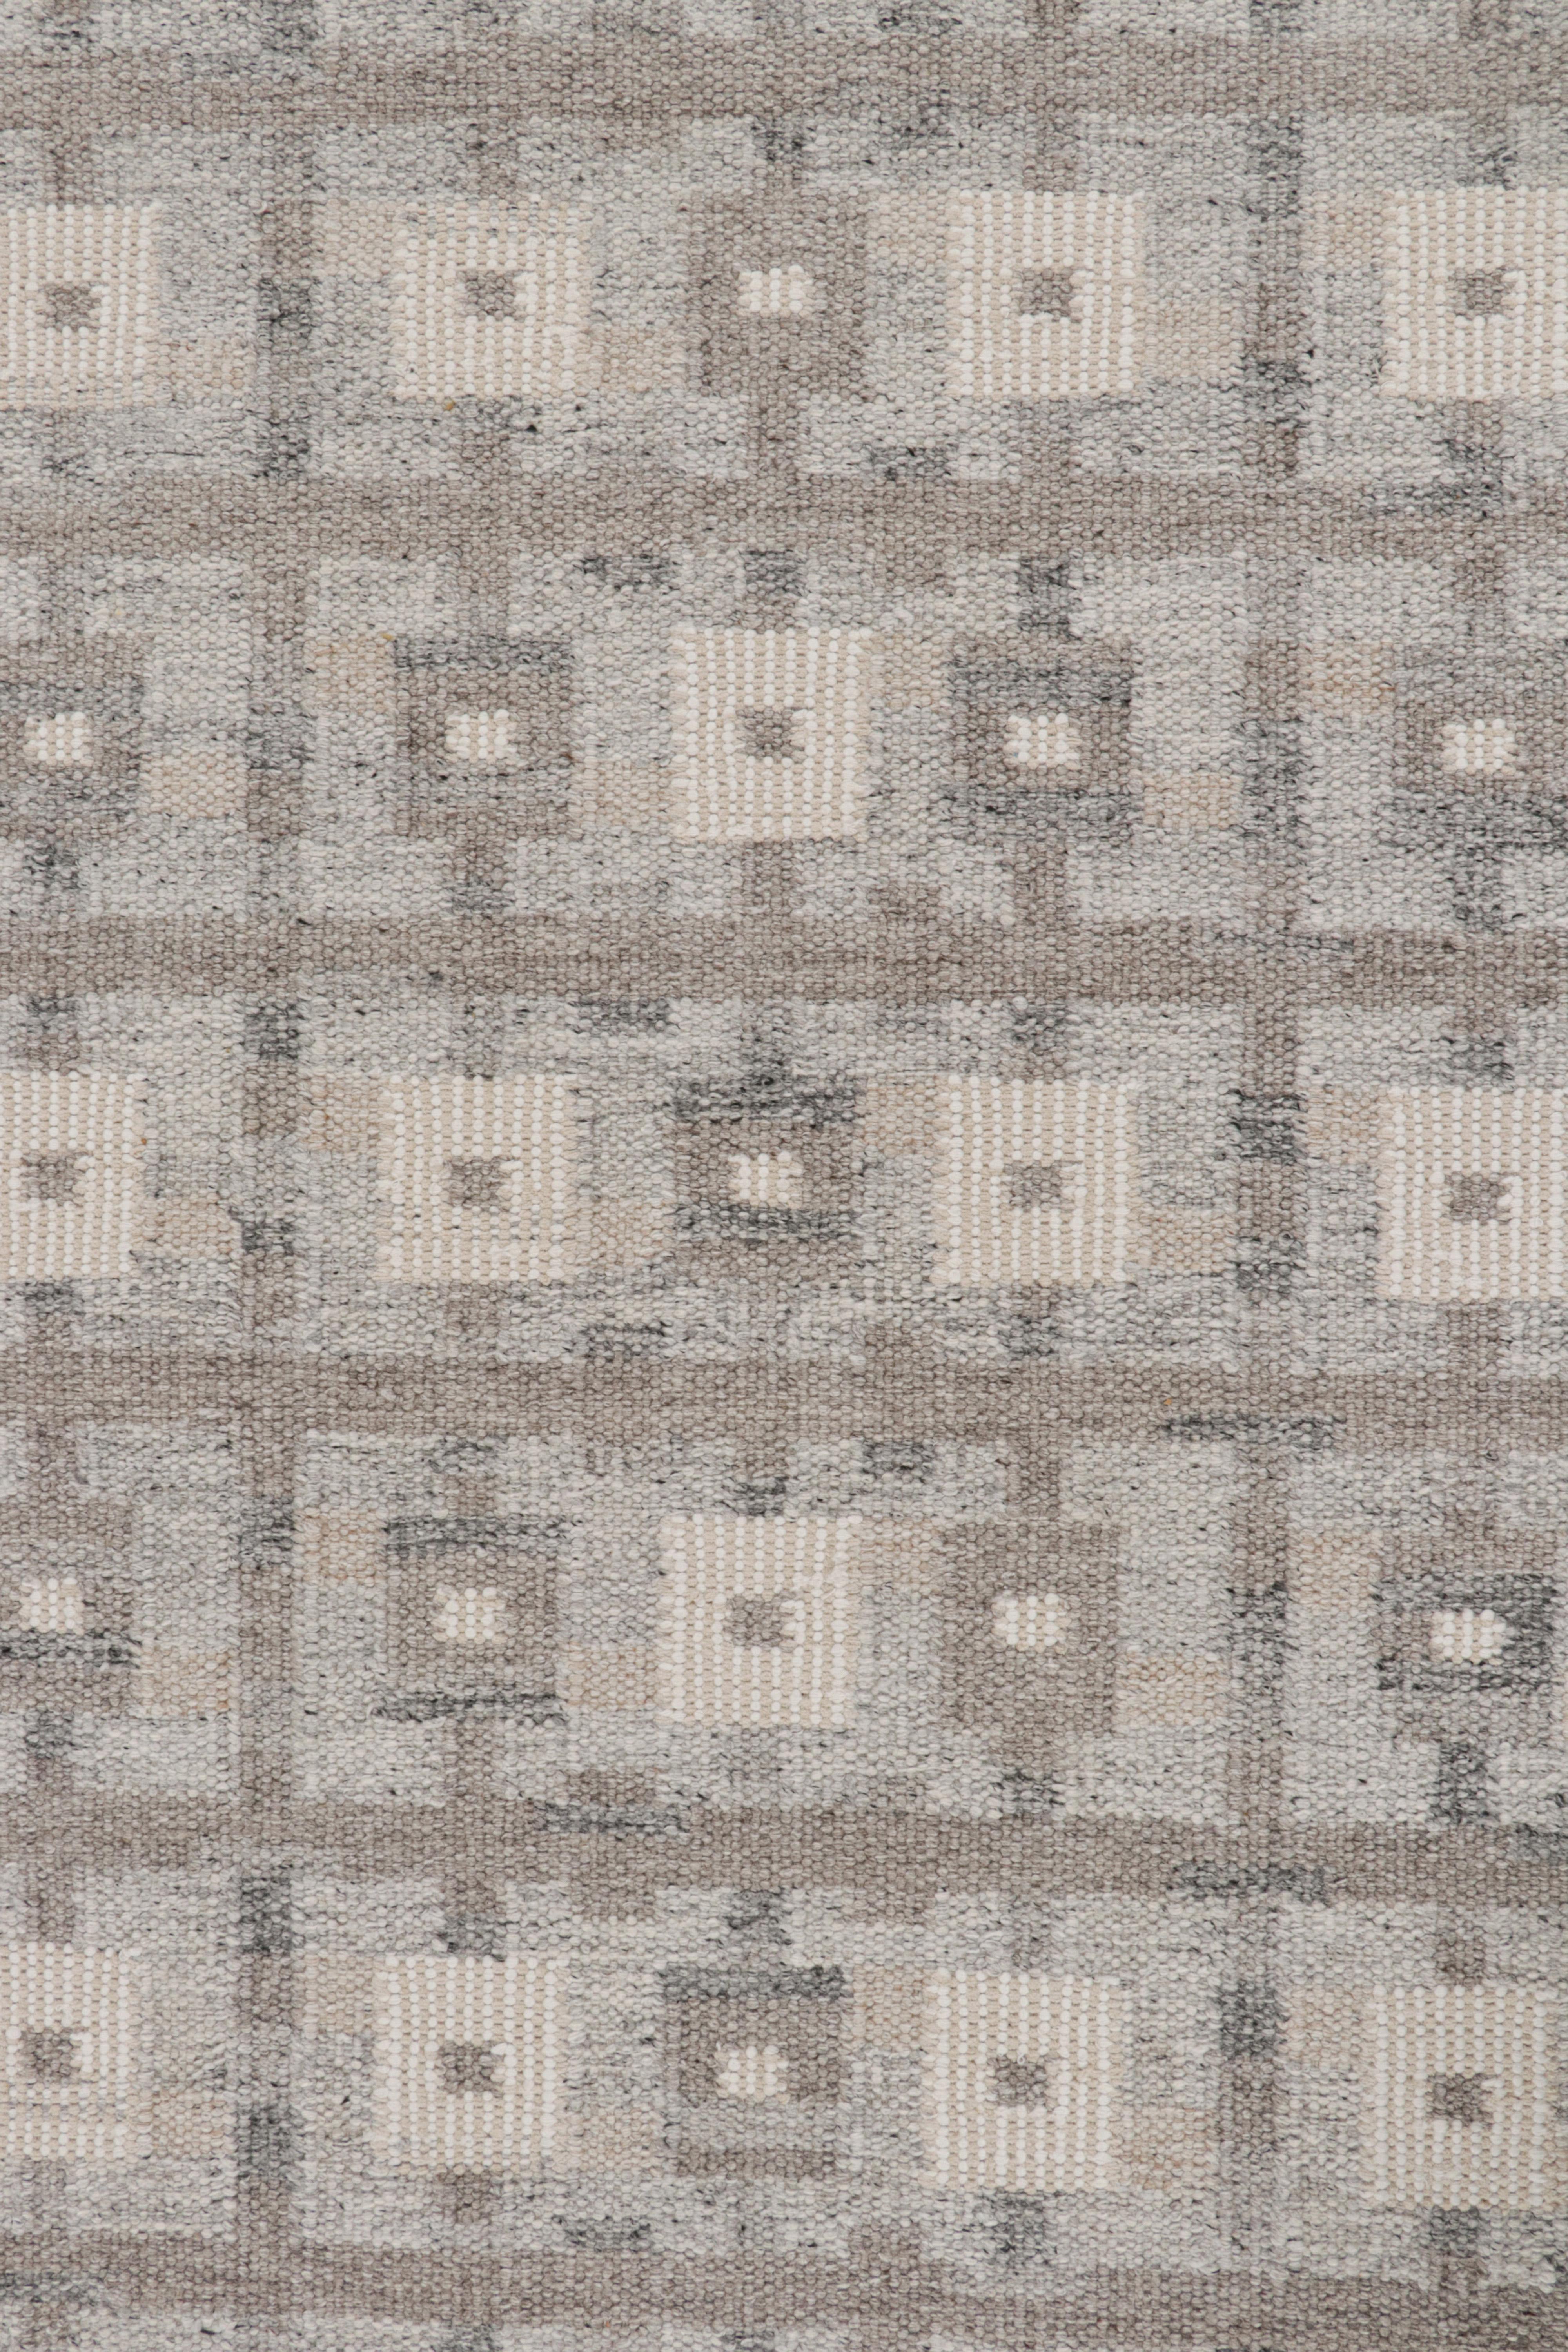 Rug & Kilim’s Scandinavian Style Kilim in Brown, gray & White Patterns In New Condition For Sale In Long Island City, NY